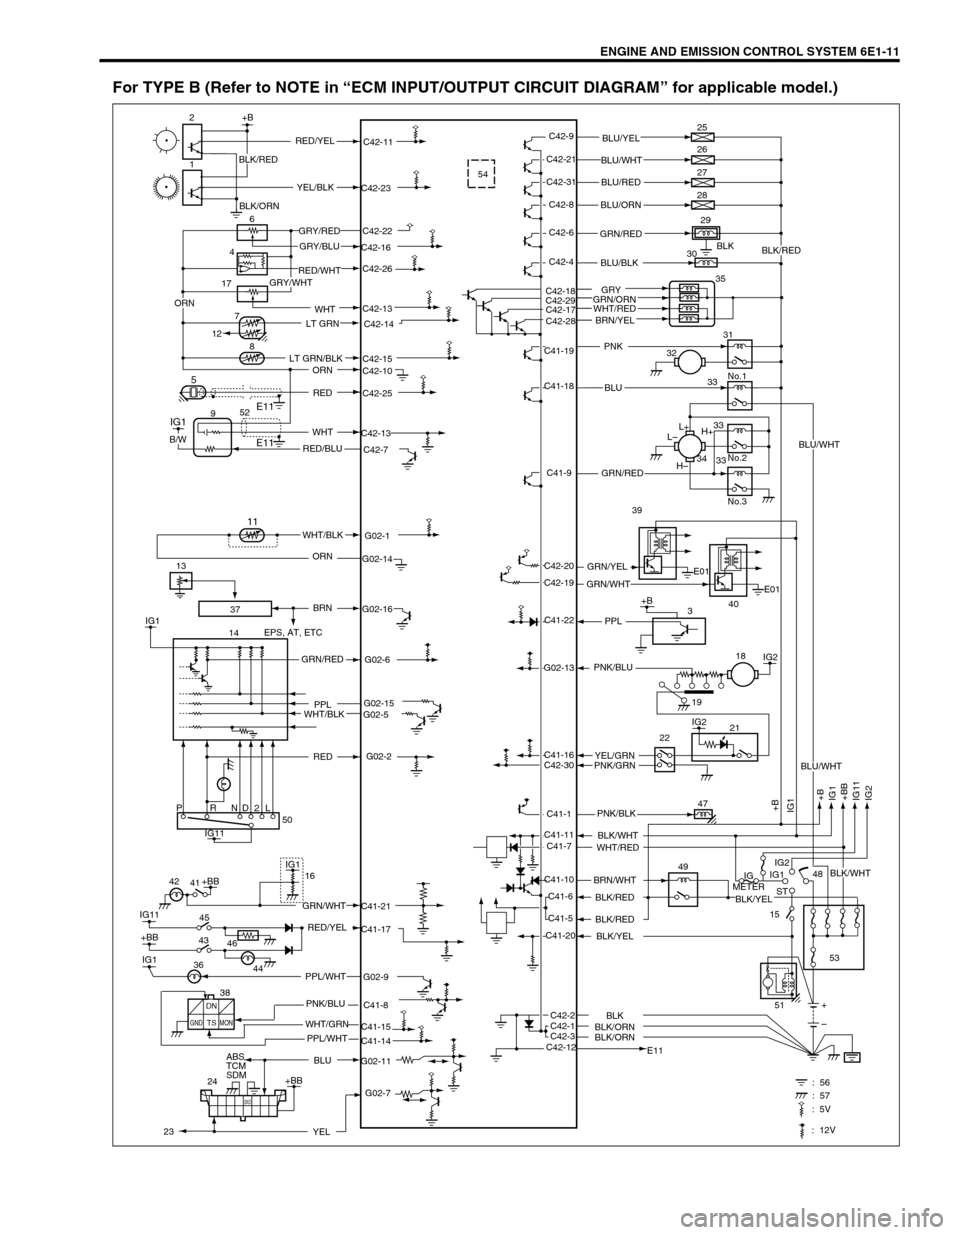 SUZUKI SWIFT 2000 1.G RG413 Service Service Manual ENGINE AND EMISSION CONTROL SYSTEM 6E1-11
For TYPE B (Refer to NOTE in “ECM INPUT/OUTPUT CIRCUIT DIAGRAM” for applicable model.)
37
54
BLK
C42-18
C42-29
C42-17
C42-28
C42-13
17
2+B
1
6
8
5
IG1
IG1